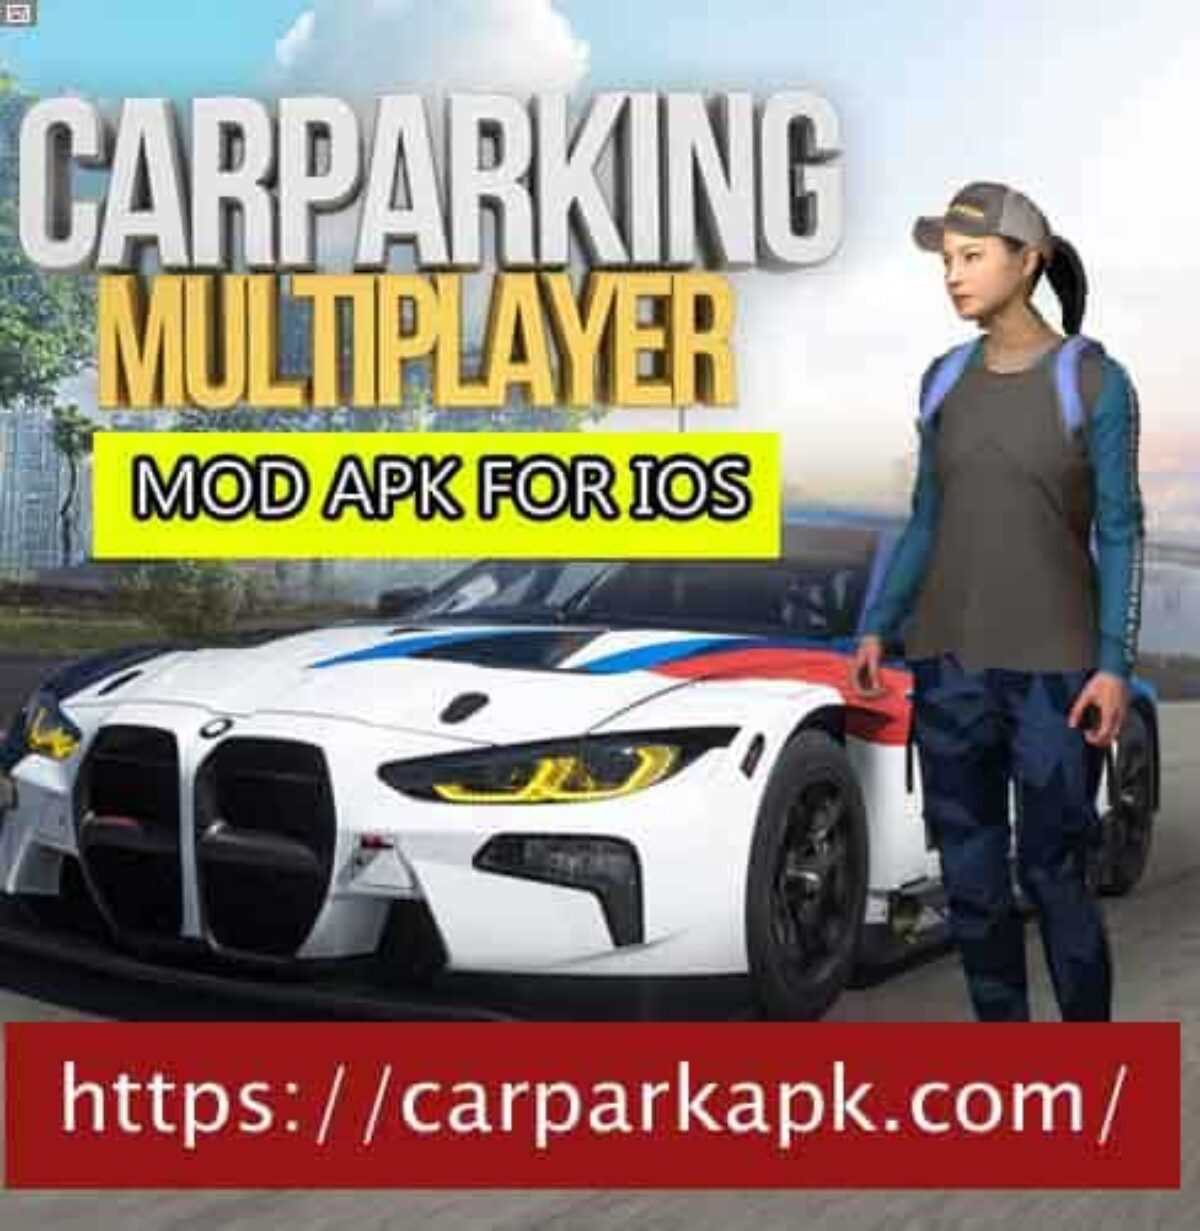 Car Parking Car Driving game mobile android iOS apk download for